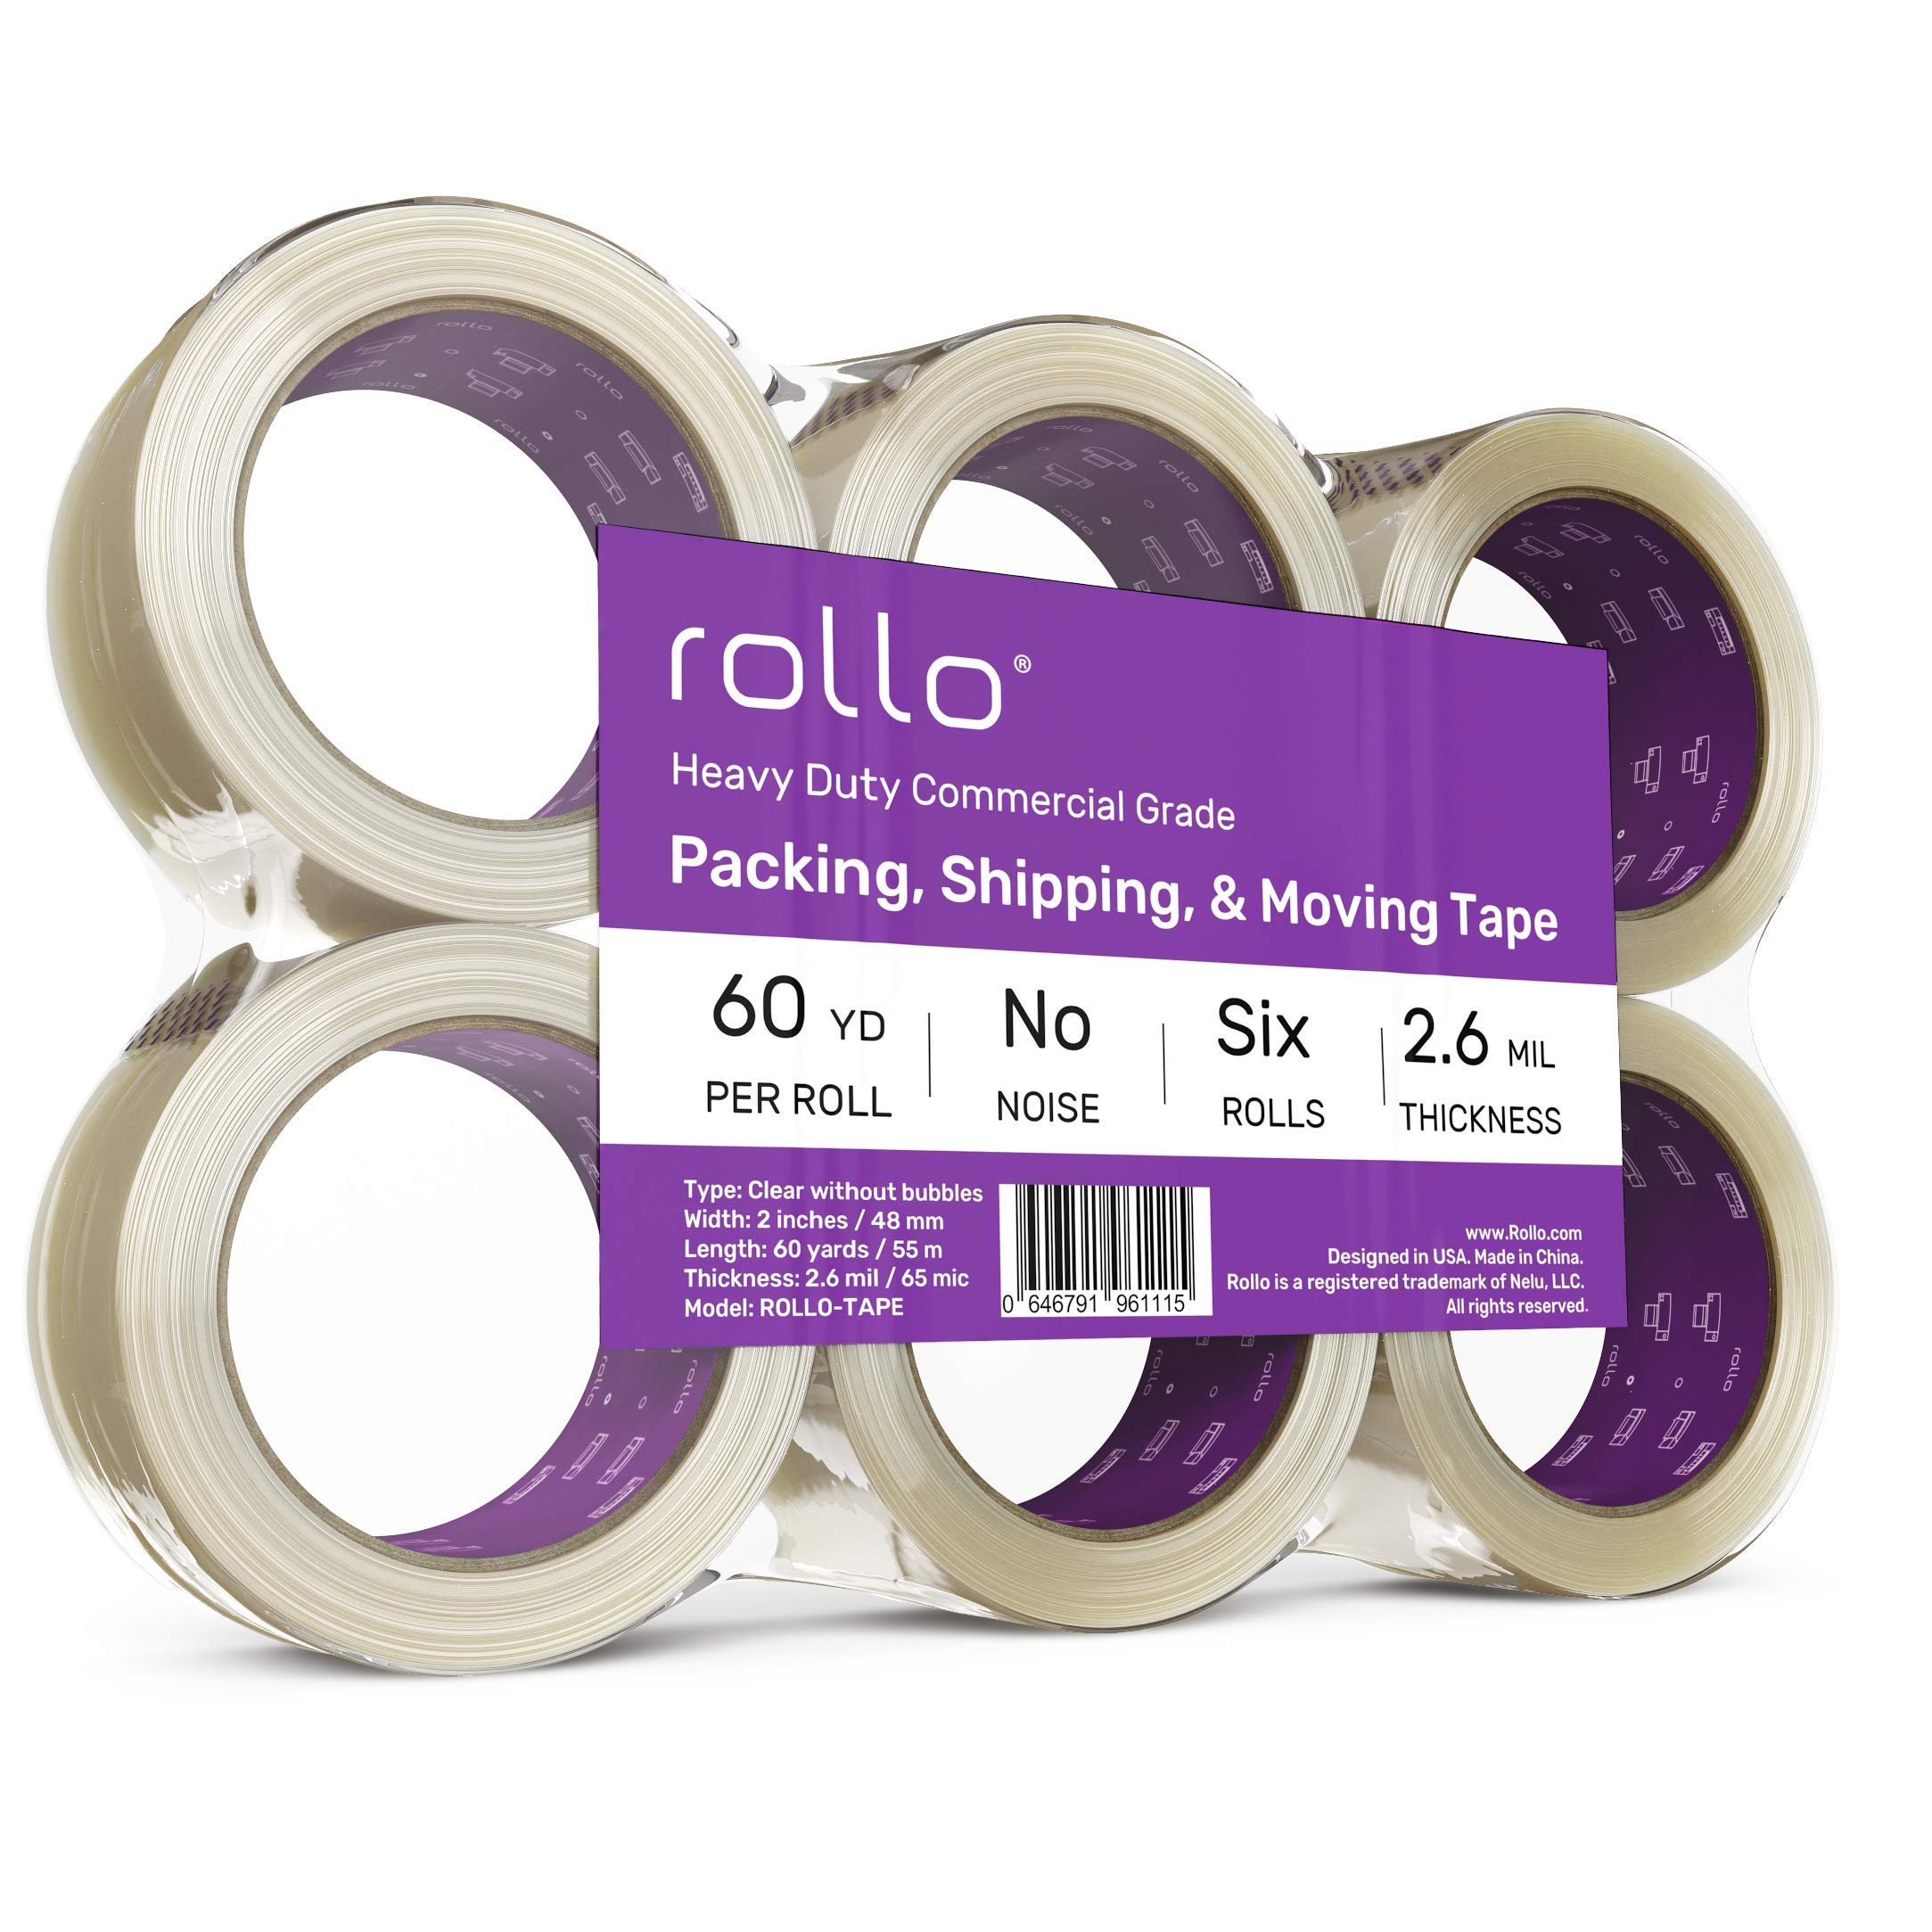 Rollo No Noise Packing Tape - Silent Shipping Tape 60 Yards x 2" Wide x 2.6 Mil Thick (6 Refill Rolls) - Clear Heavy Duty Industrial Quiet Tape for Packaging, Shipping, Moving, Storage with No Bubbles